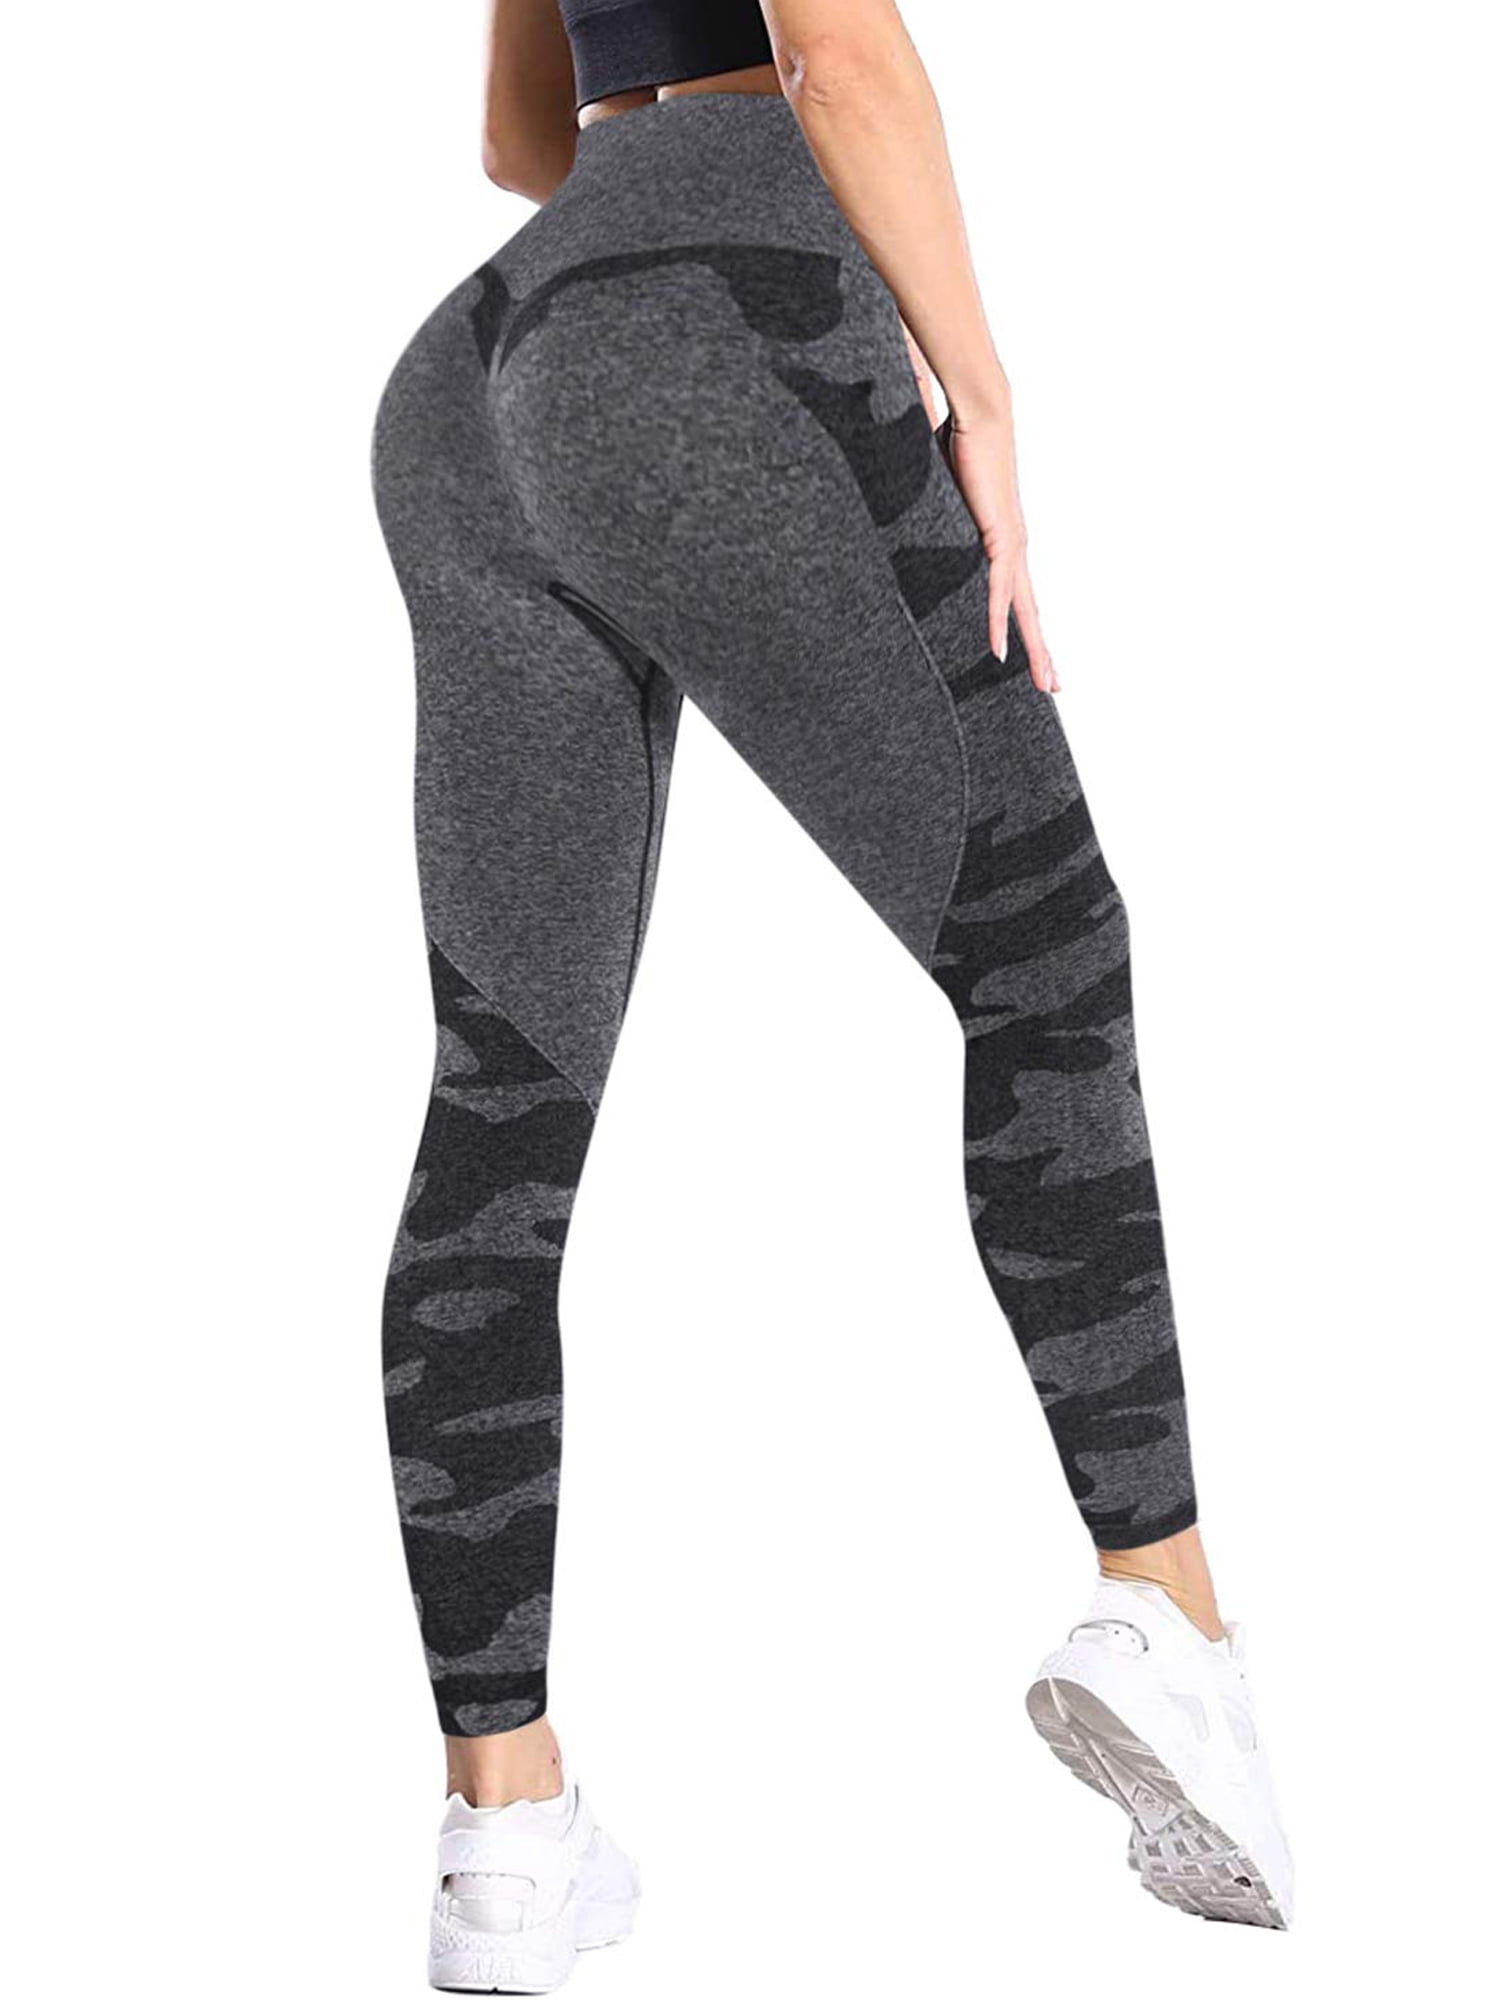 Womens Yoga Pants Athletic Stretch Fitness Workout Capri Leggings With Pocket Q1 